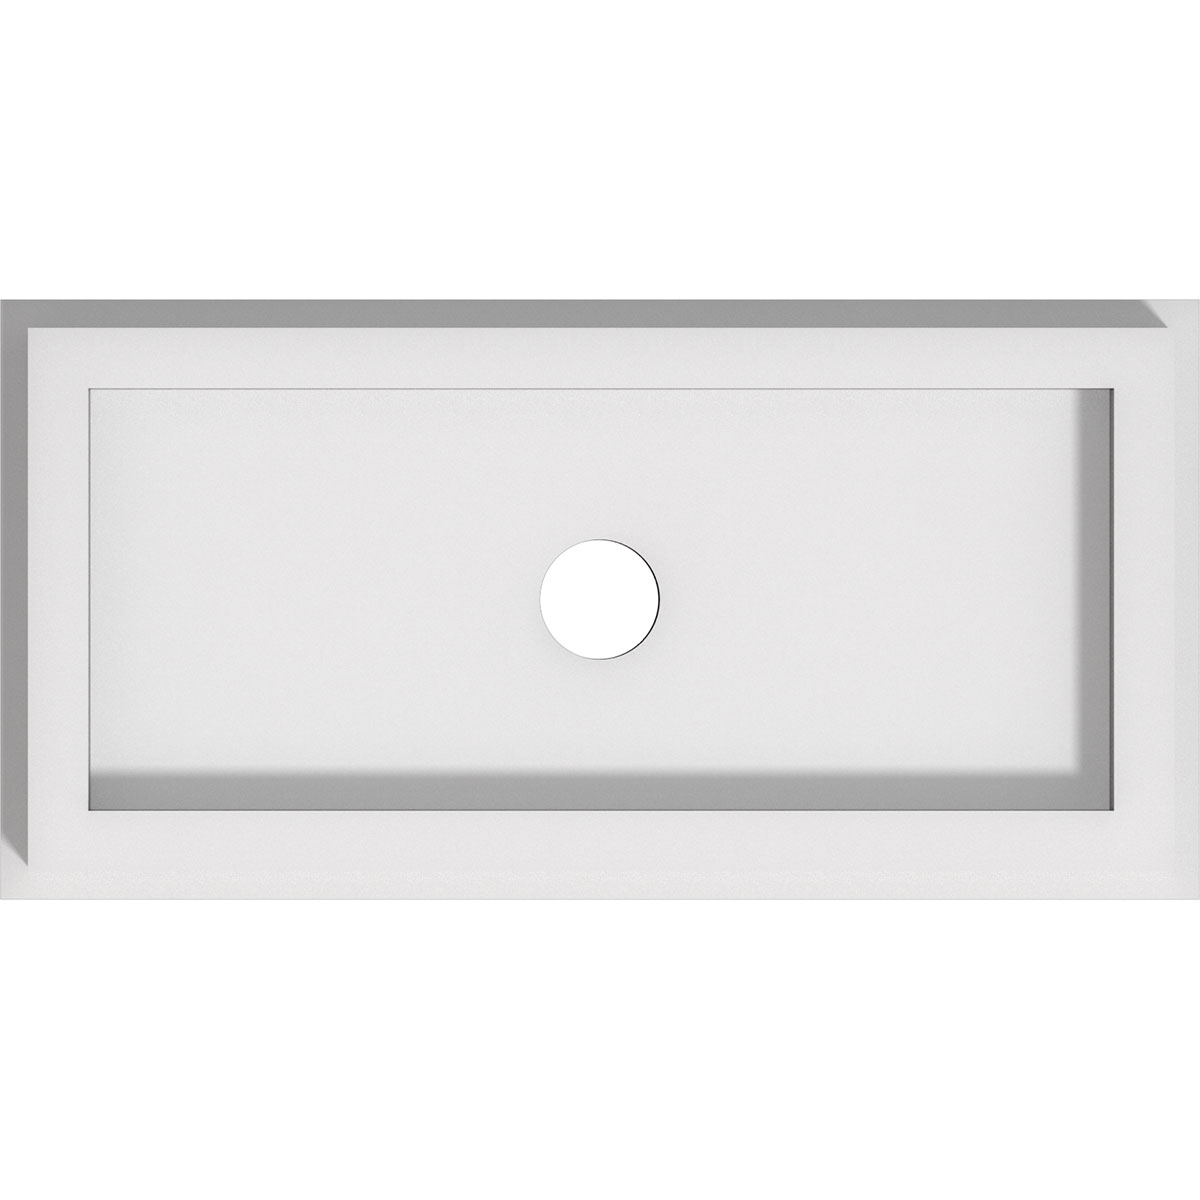 Cmp10x5re-01000 1 In. Id X 3.5 In. Rectangle Architectural Grade Pvc Contemporary Ceiling Medallion